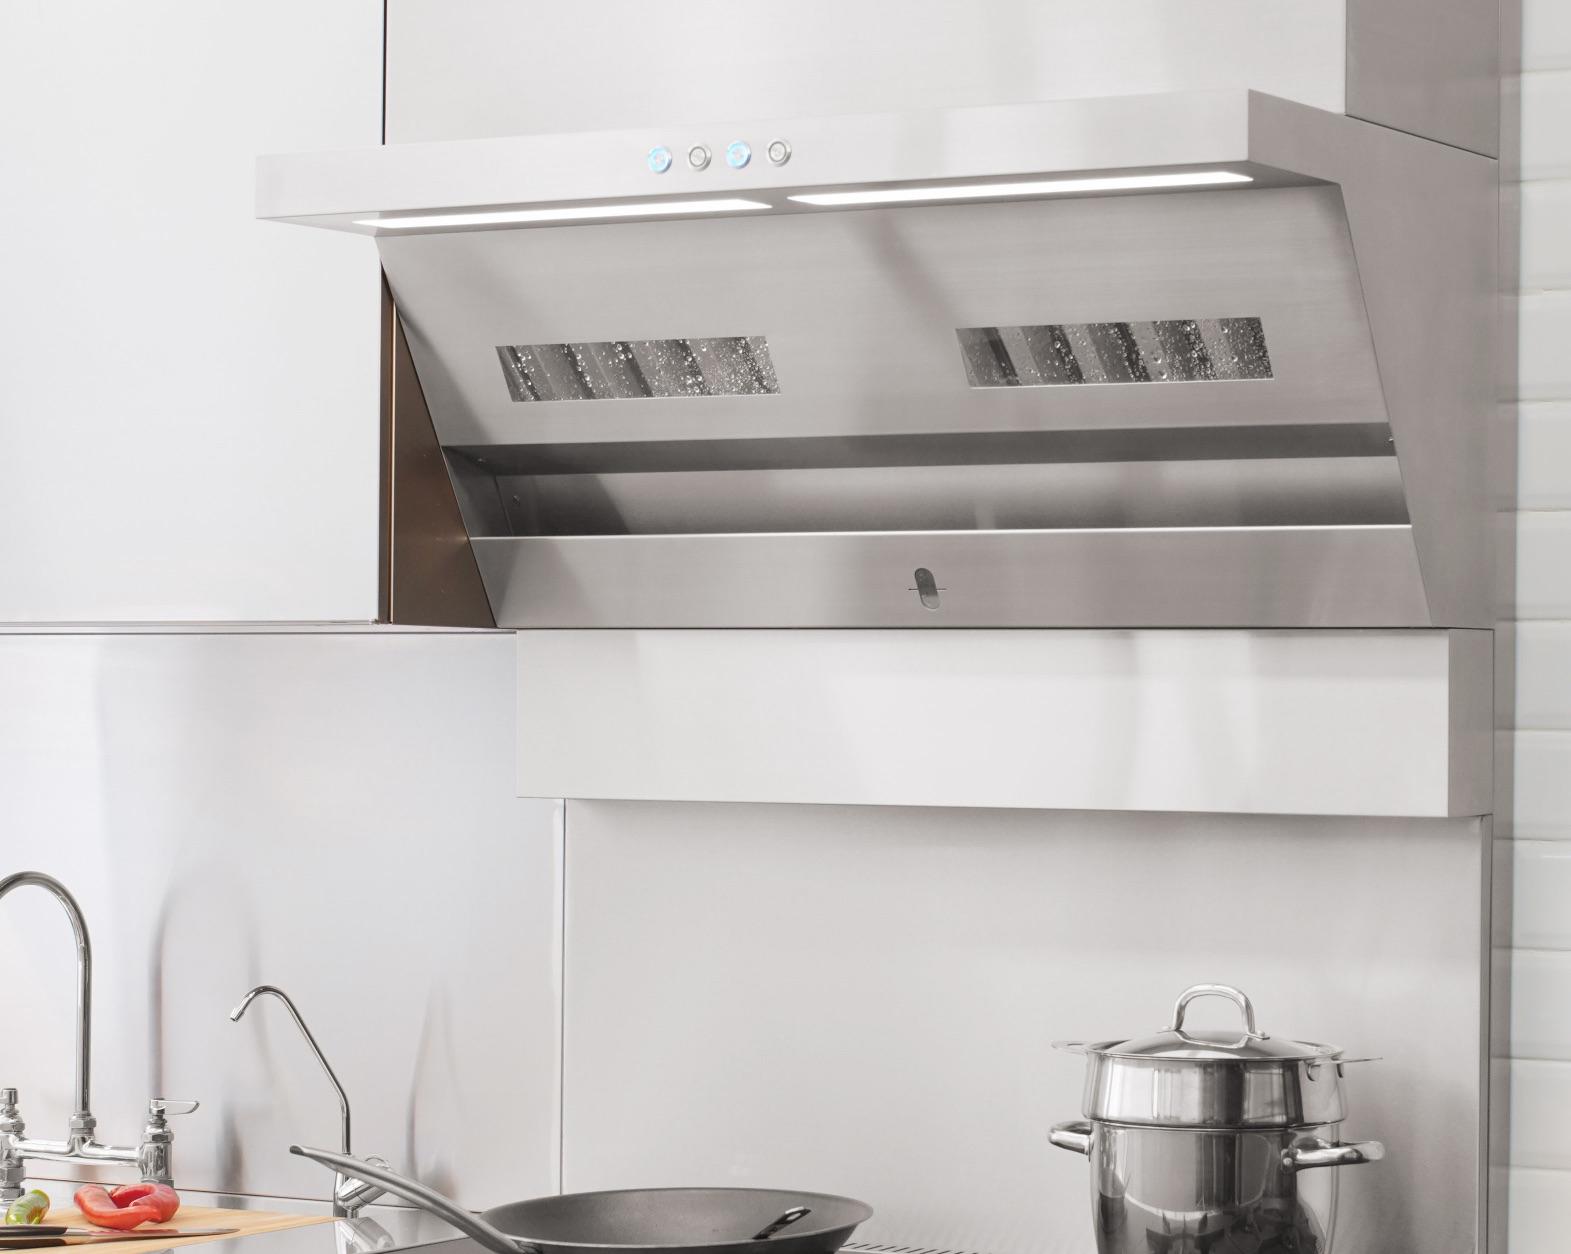 Elevate your home cooking with UNICO's professional-quality offerings